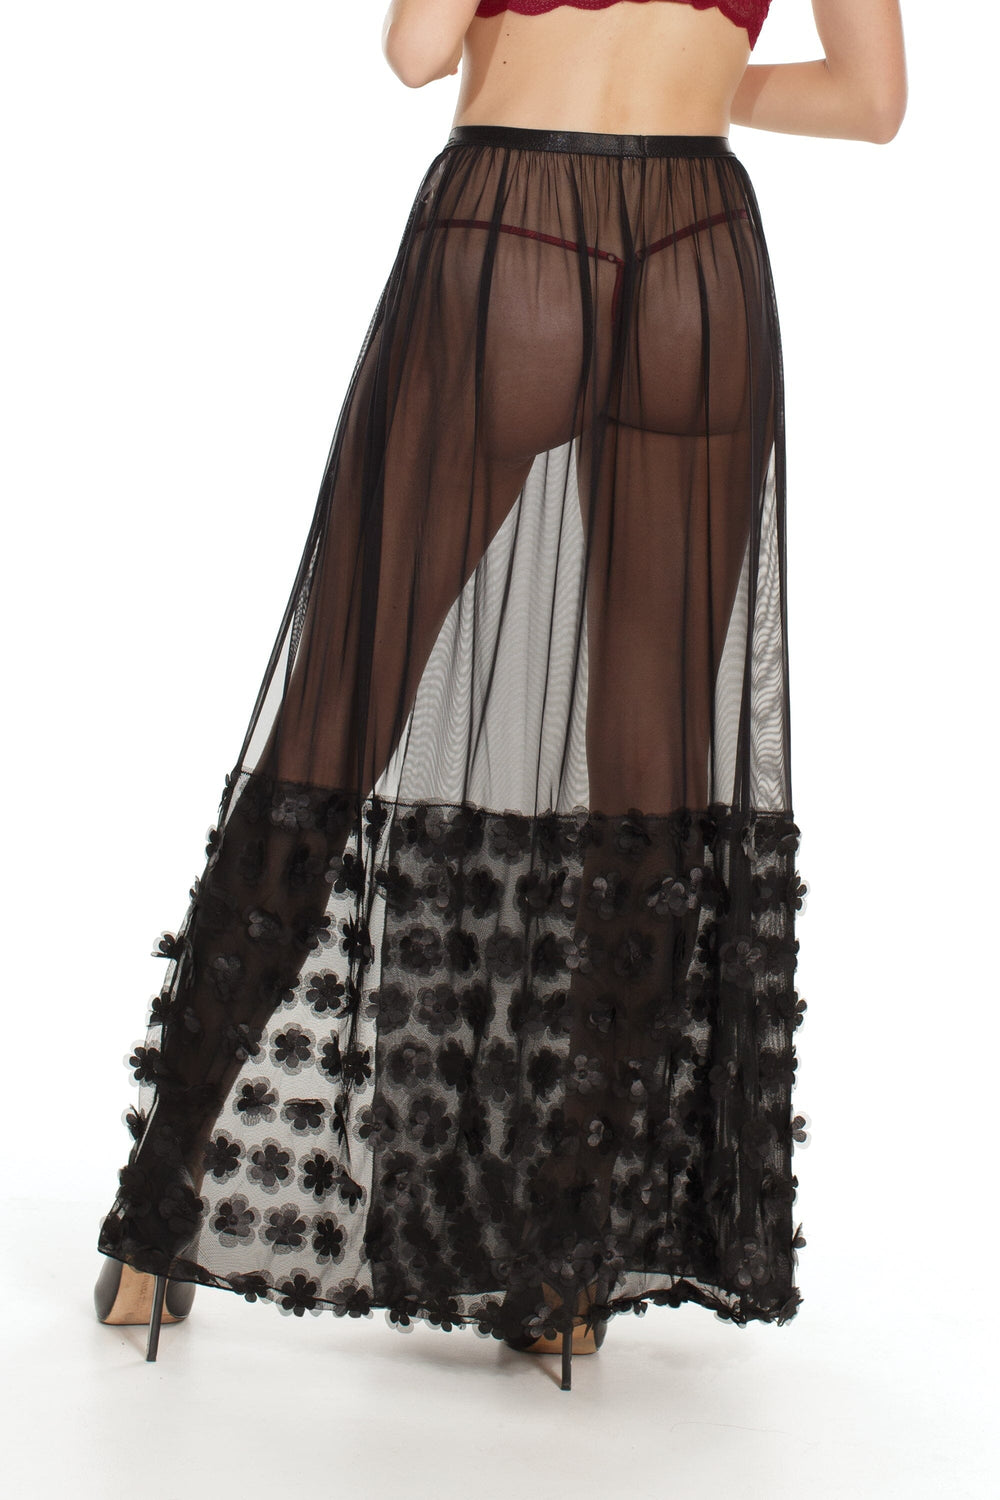 Waistband With Floral Details-Cover Ups-Coquette-Black-O/S-SEXYSHOES.COM